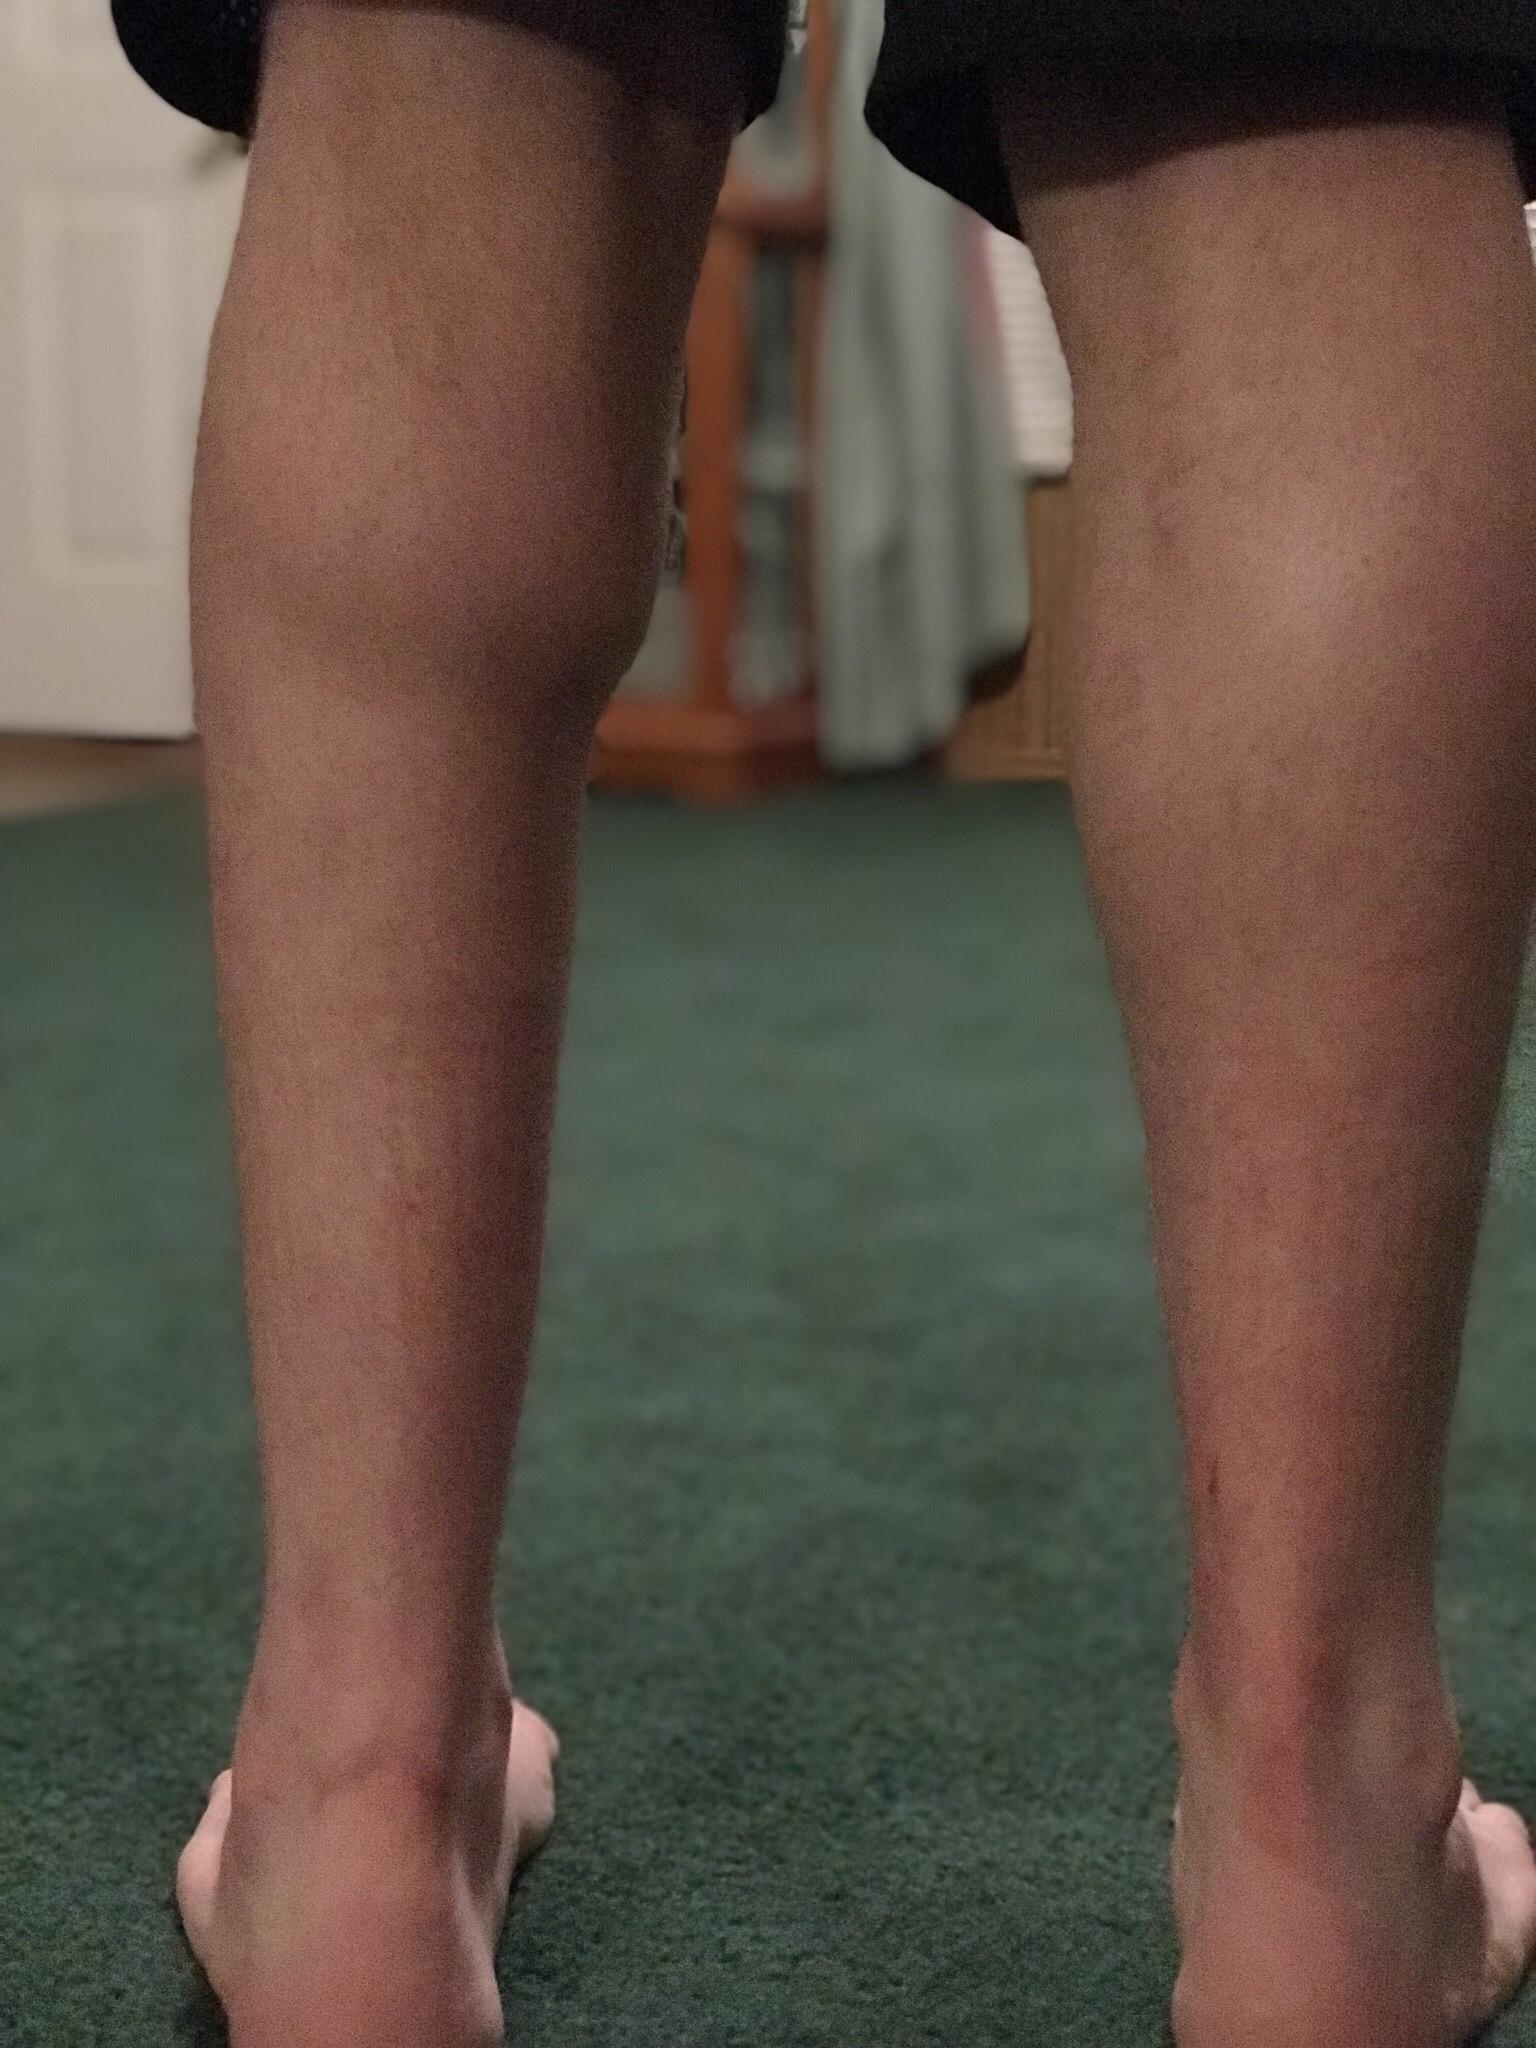 One leg with a severed Achilles tendon